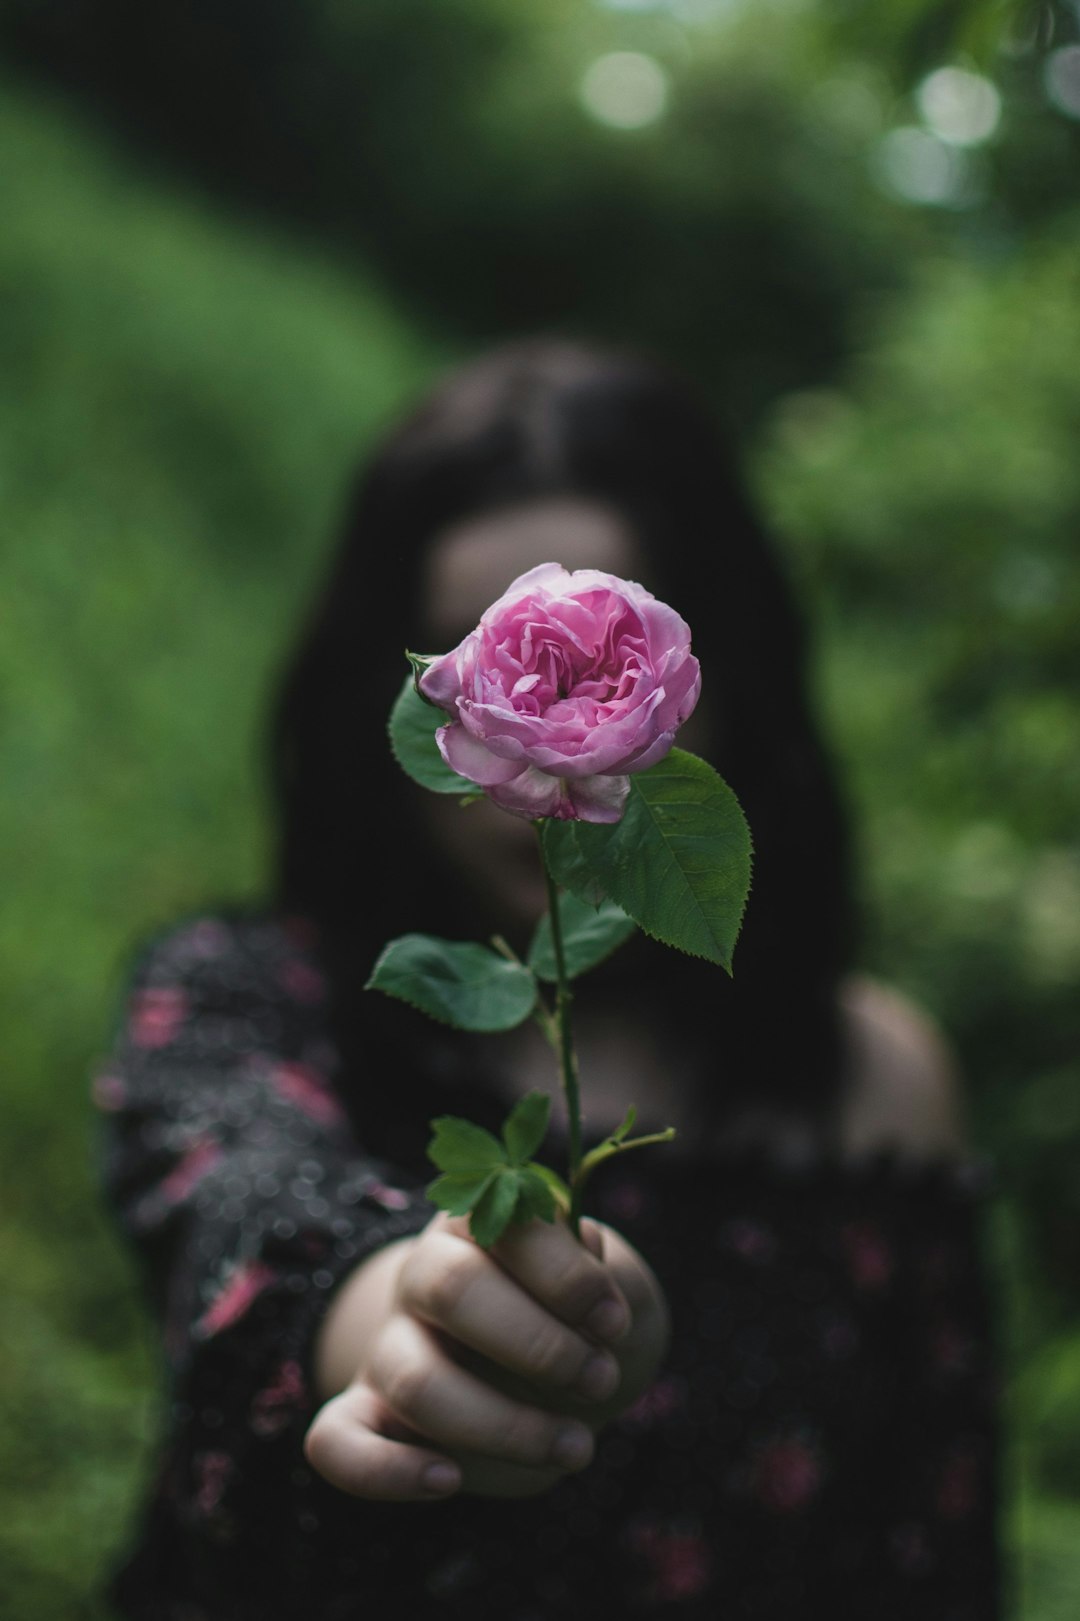 person holding pink rose during daytime